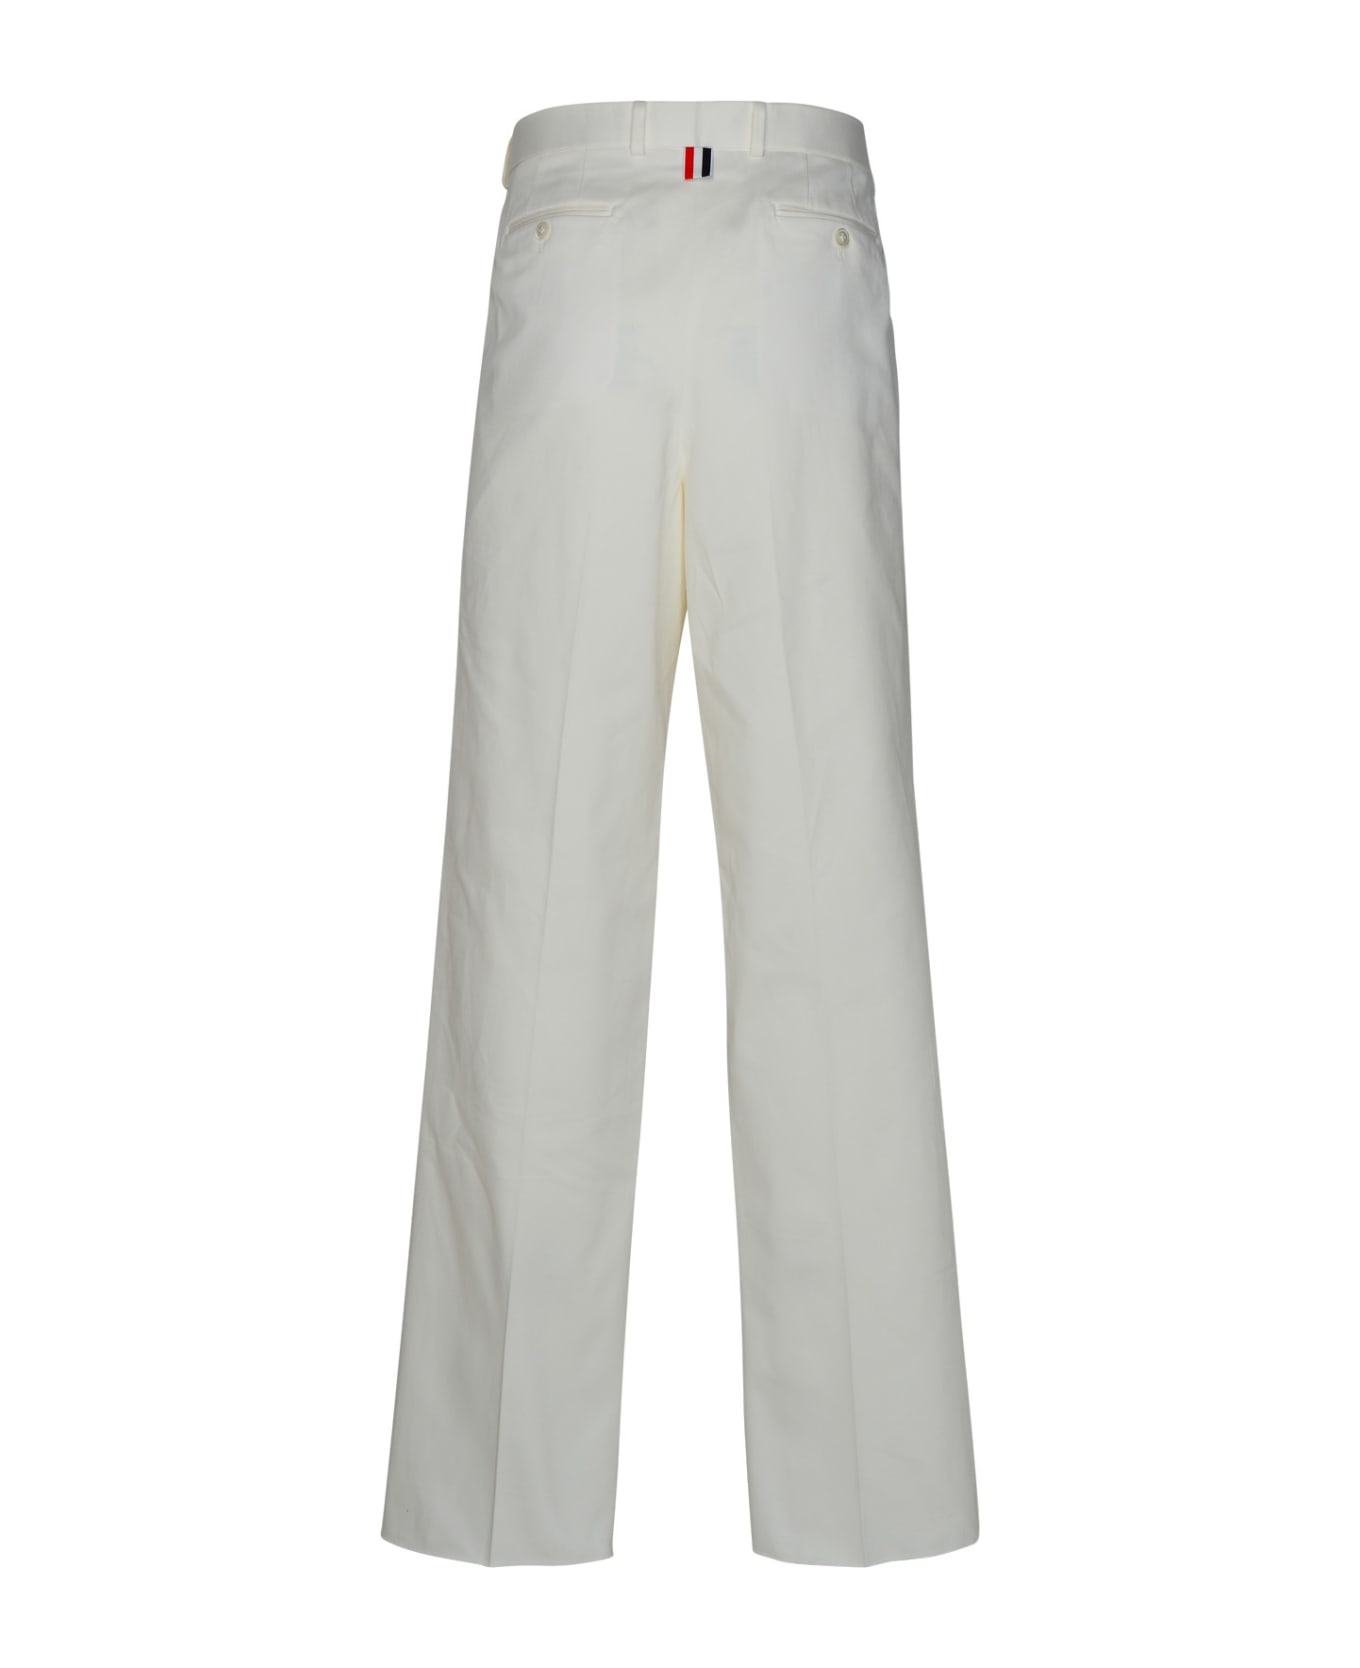 Thom Browne Tailored Trousers In White Cotton - White